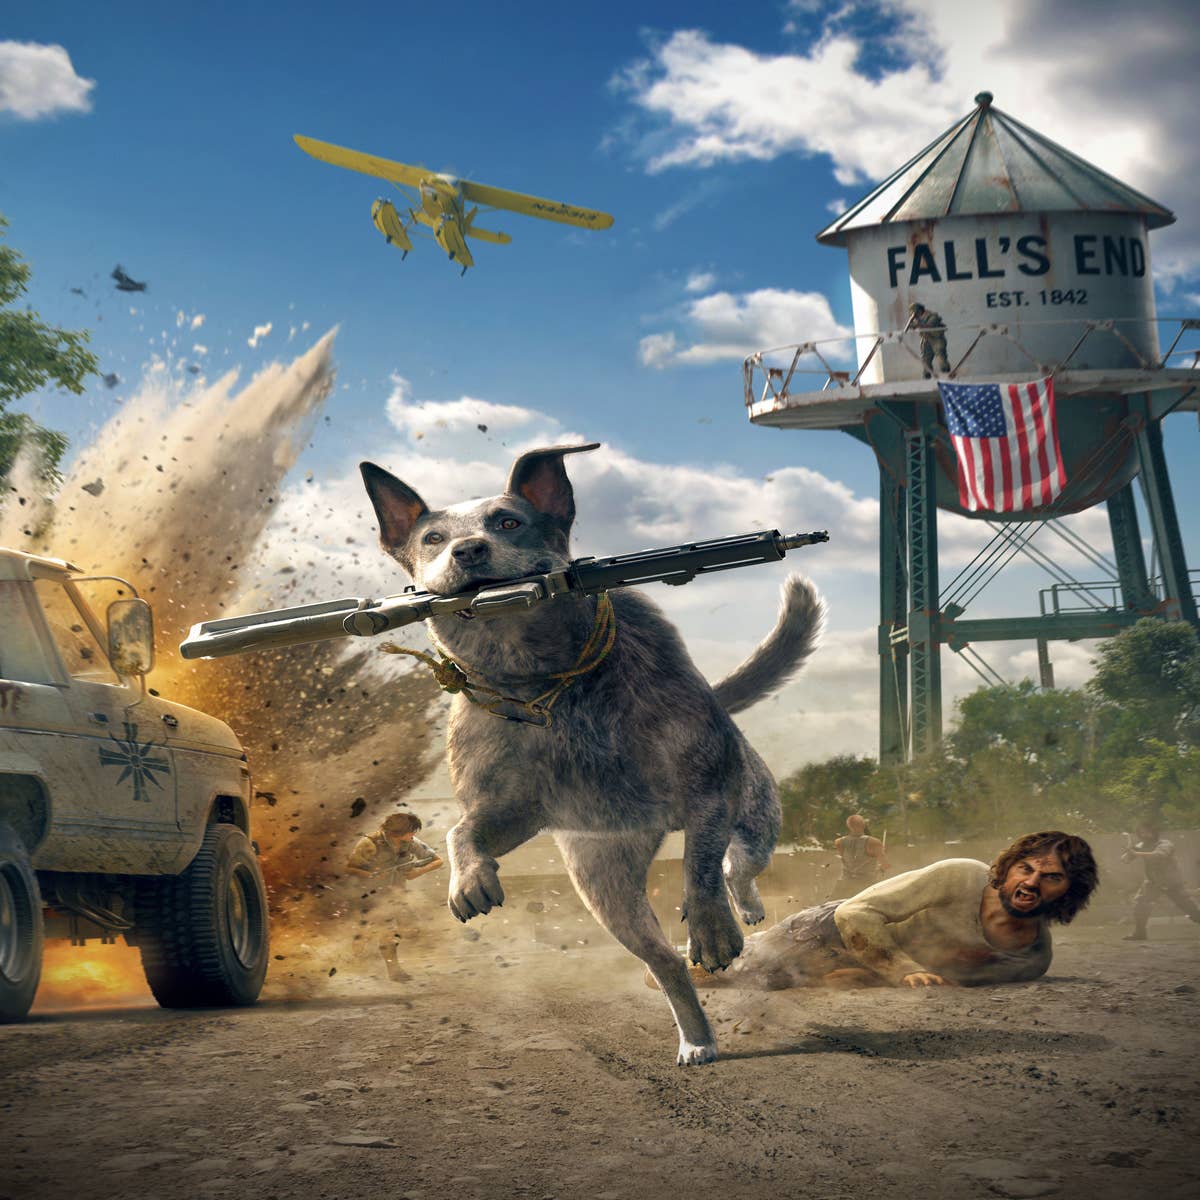 Far Cry 5 - 5th Anniversary Free Next-Gen 60 FPS Update  Discover the  open-world of Hope County, Montana, besieged by a fanatical doomsday cult.  Dive into the action in solo or